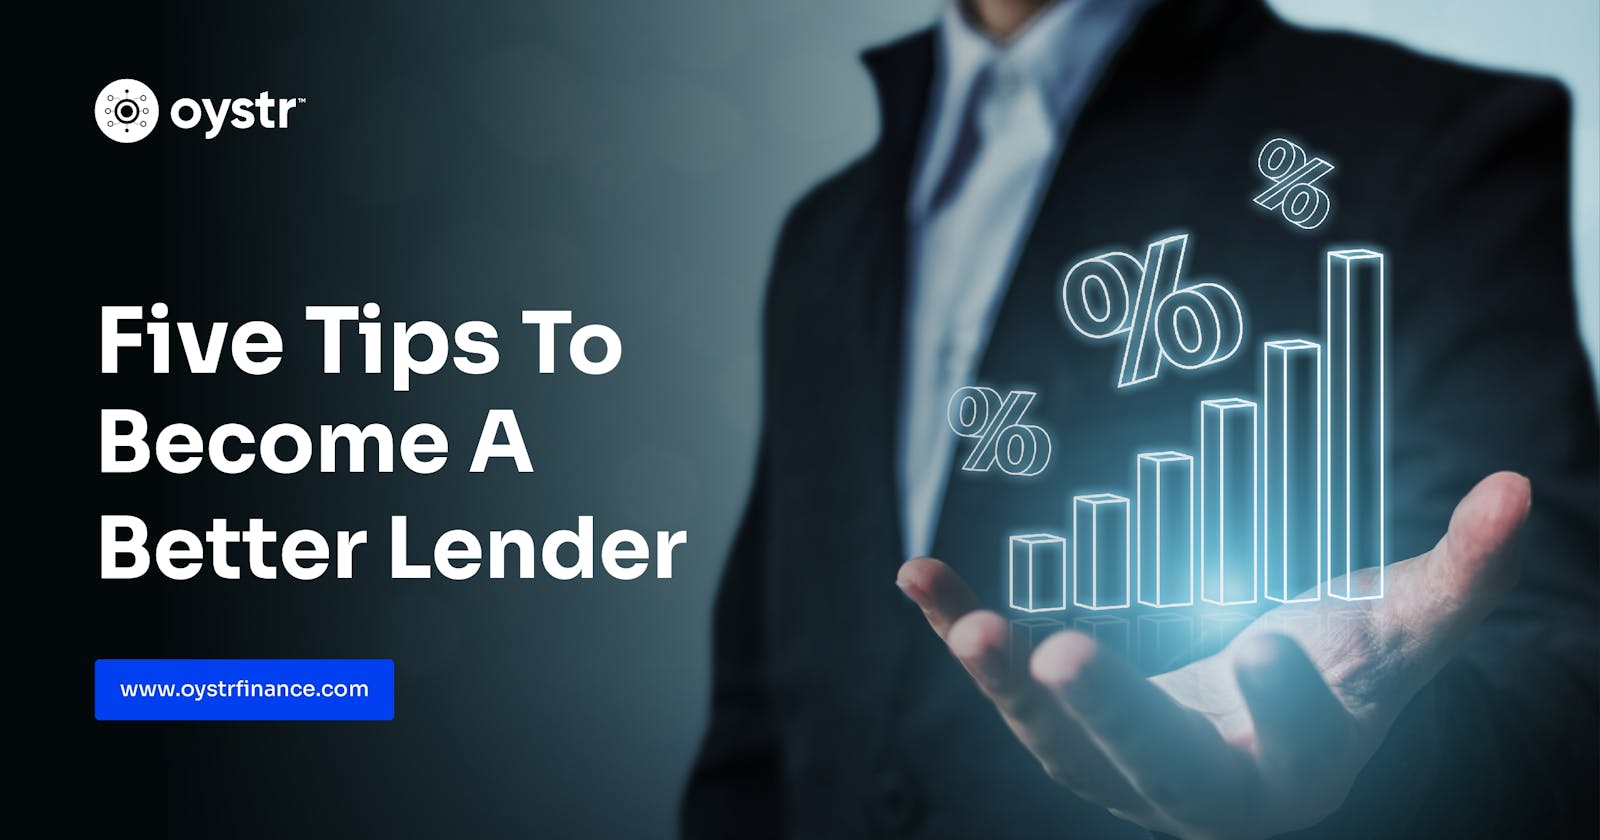 5 Tips To Become A Better Lender